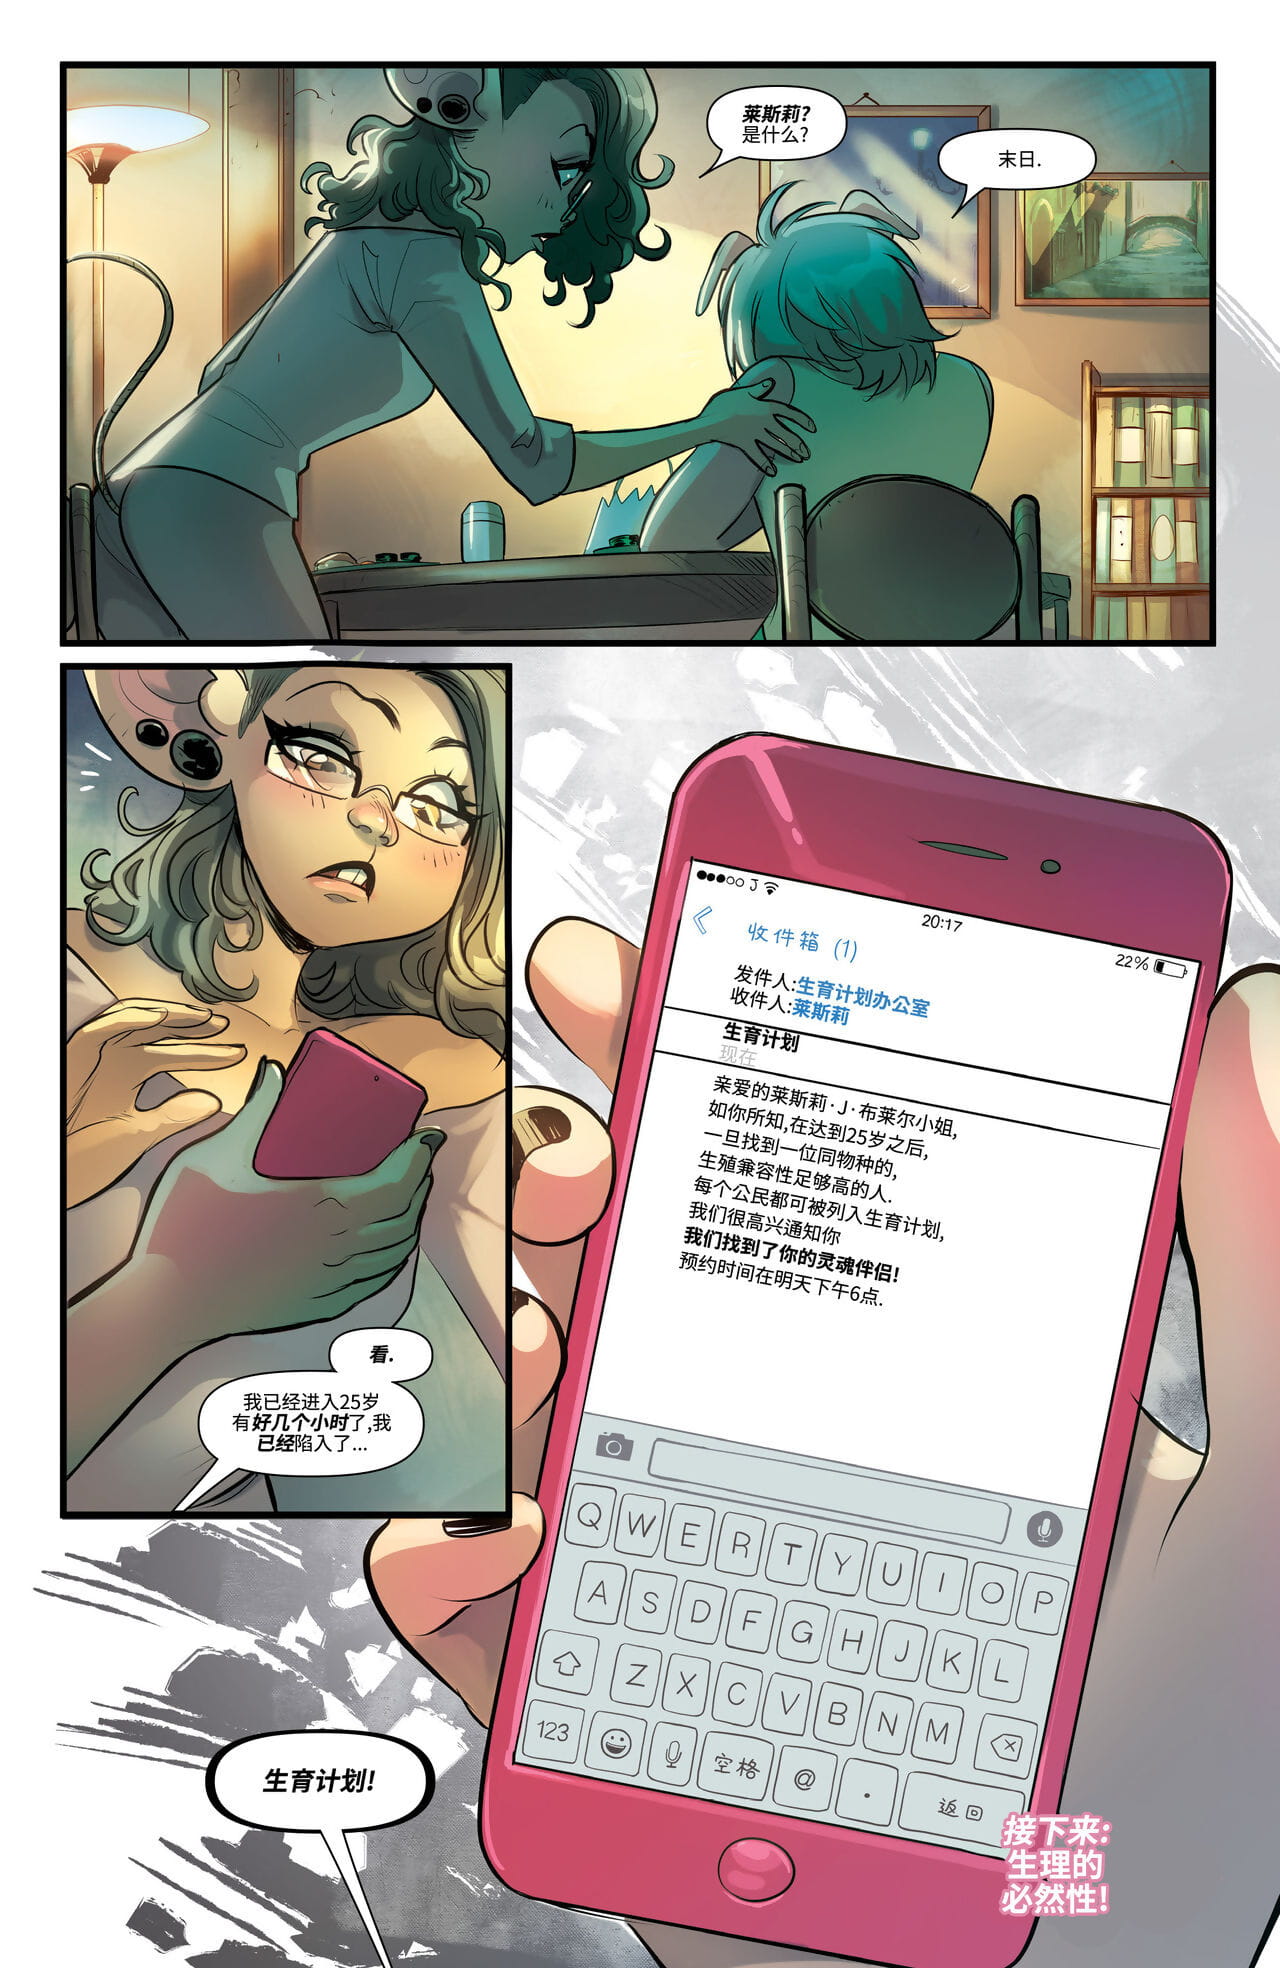 Unnatural - 反自然 - Issue 1 page 1